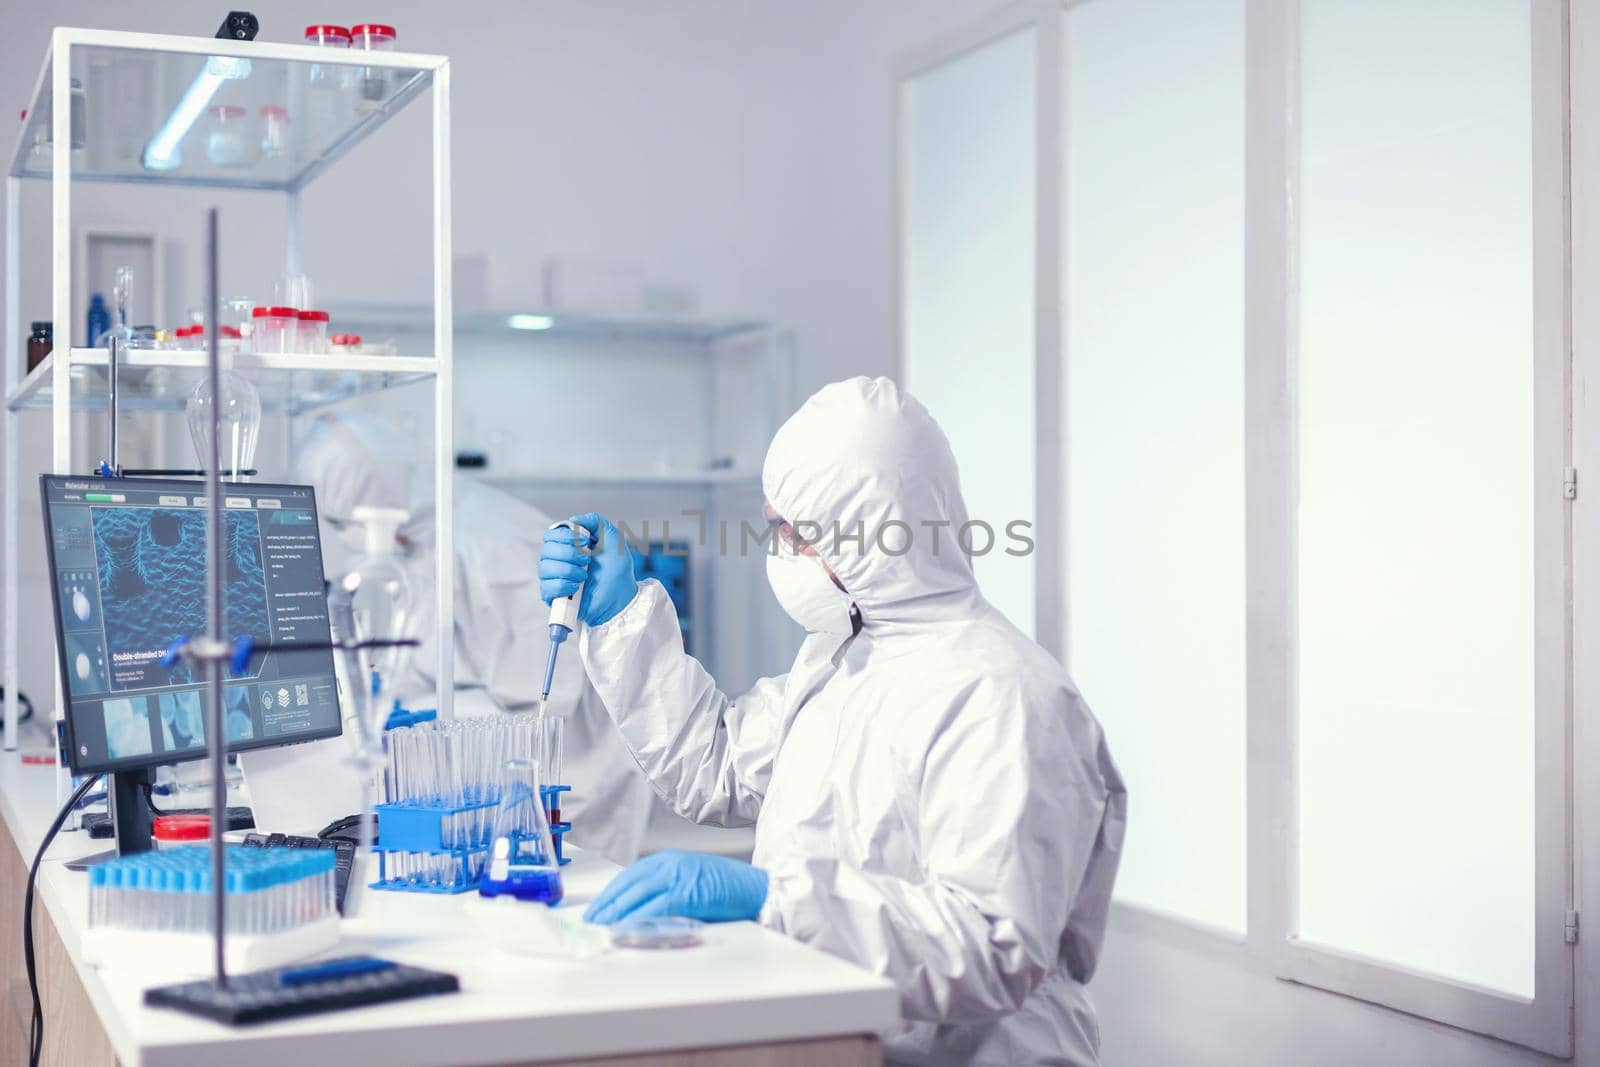 Doctor taking carefully sample from test tube using automatic pipette by DCStudio